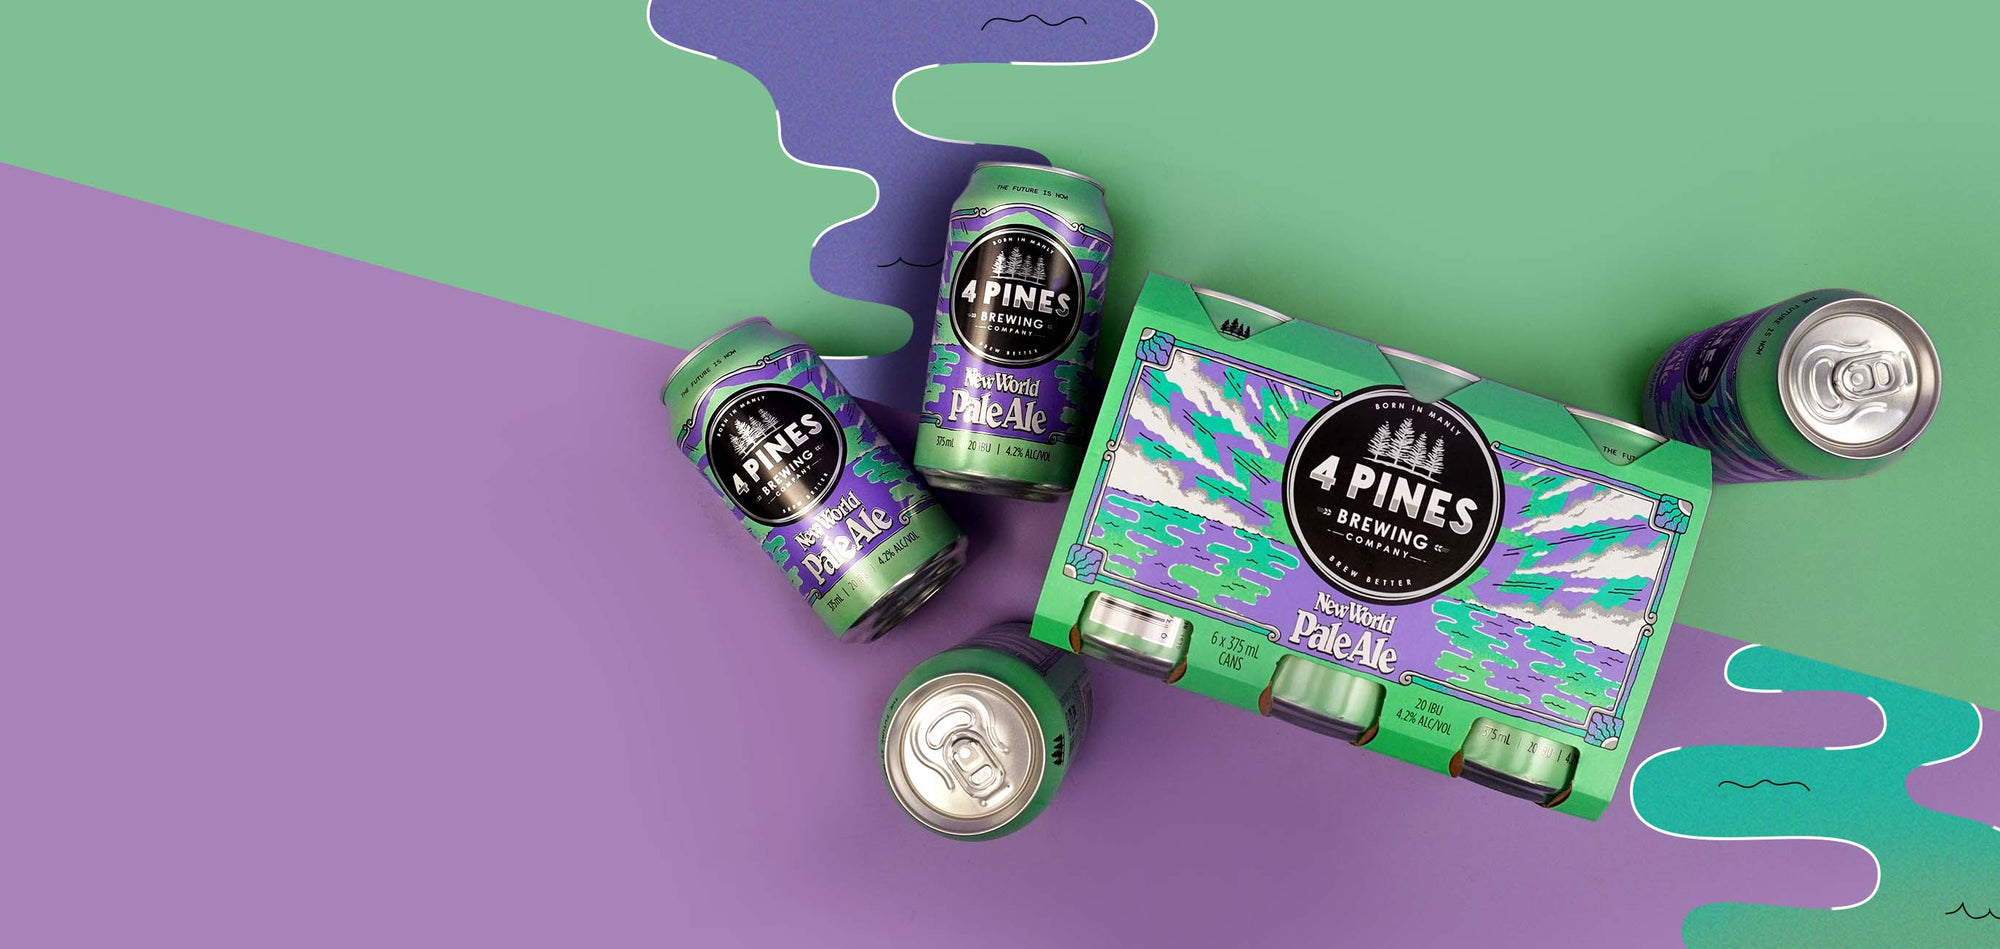 4 Pines New World Pale Ale